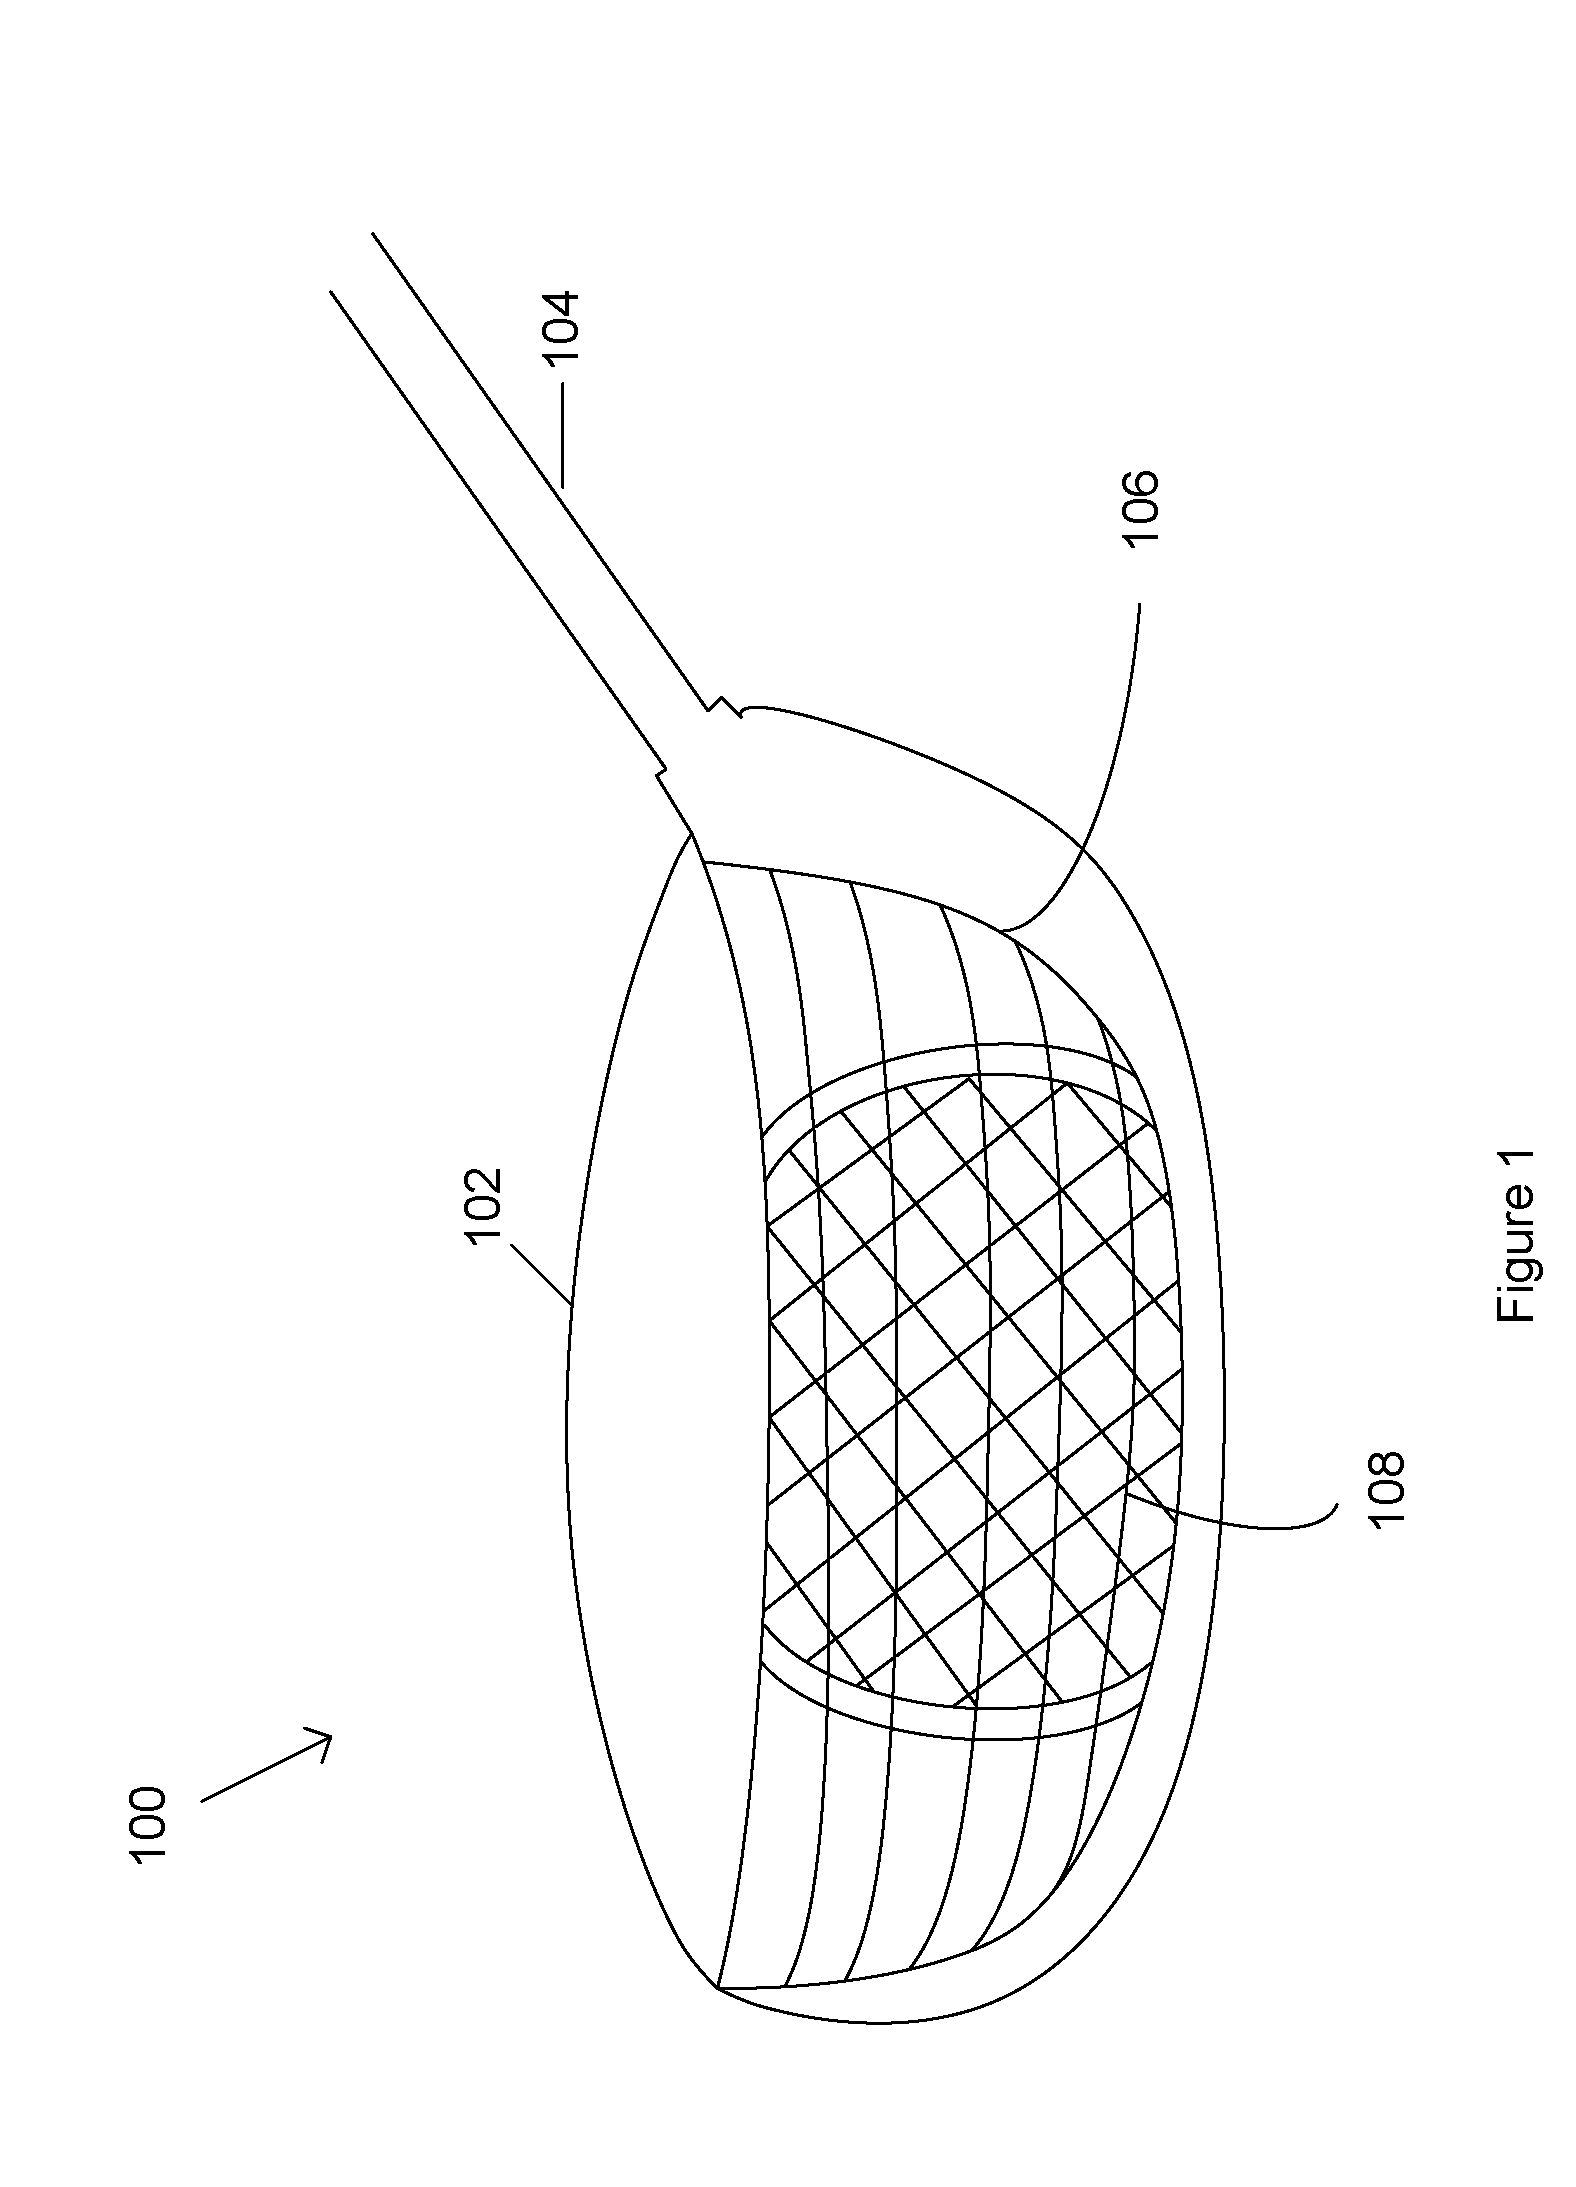 Treatment for the hitting surface of a golf club and a method for applying the same